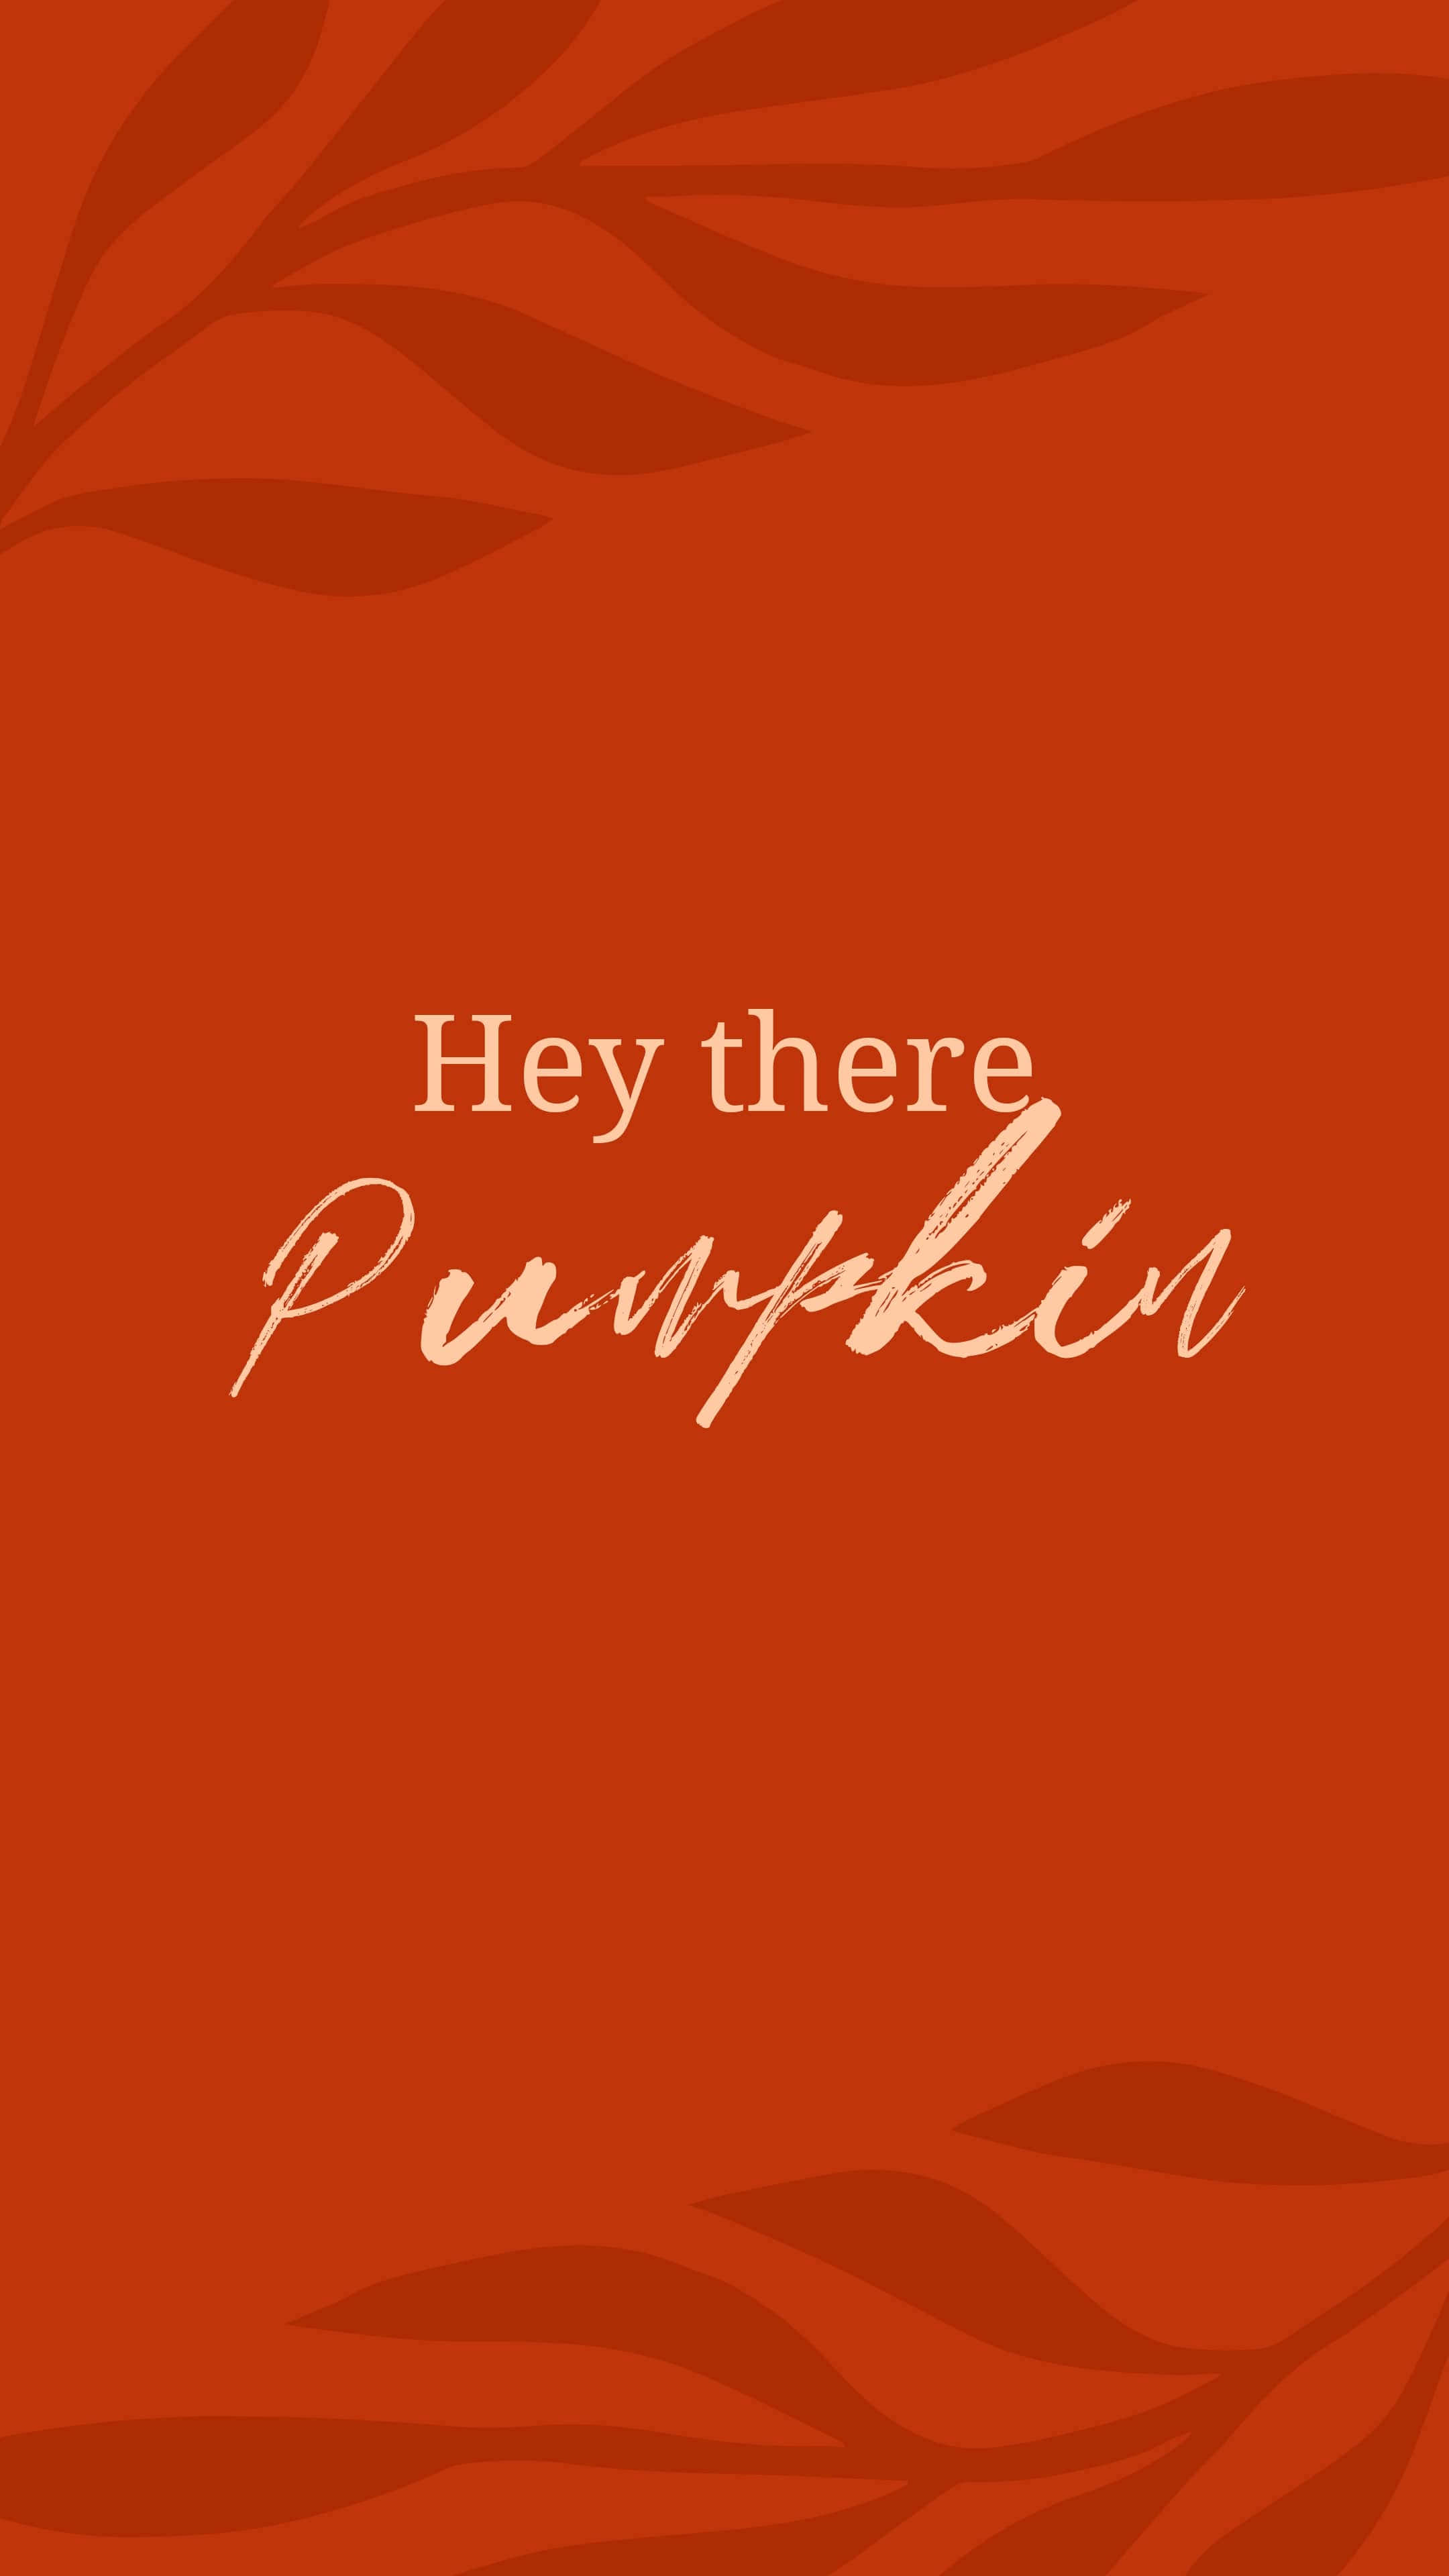 Fall 2160 X 3840 Background